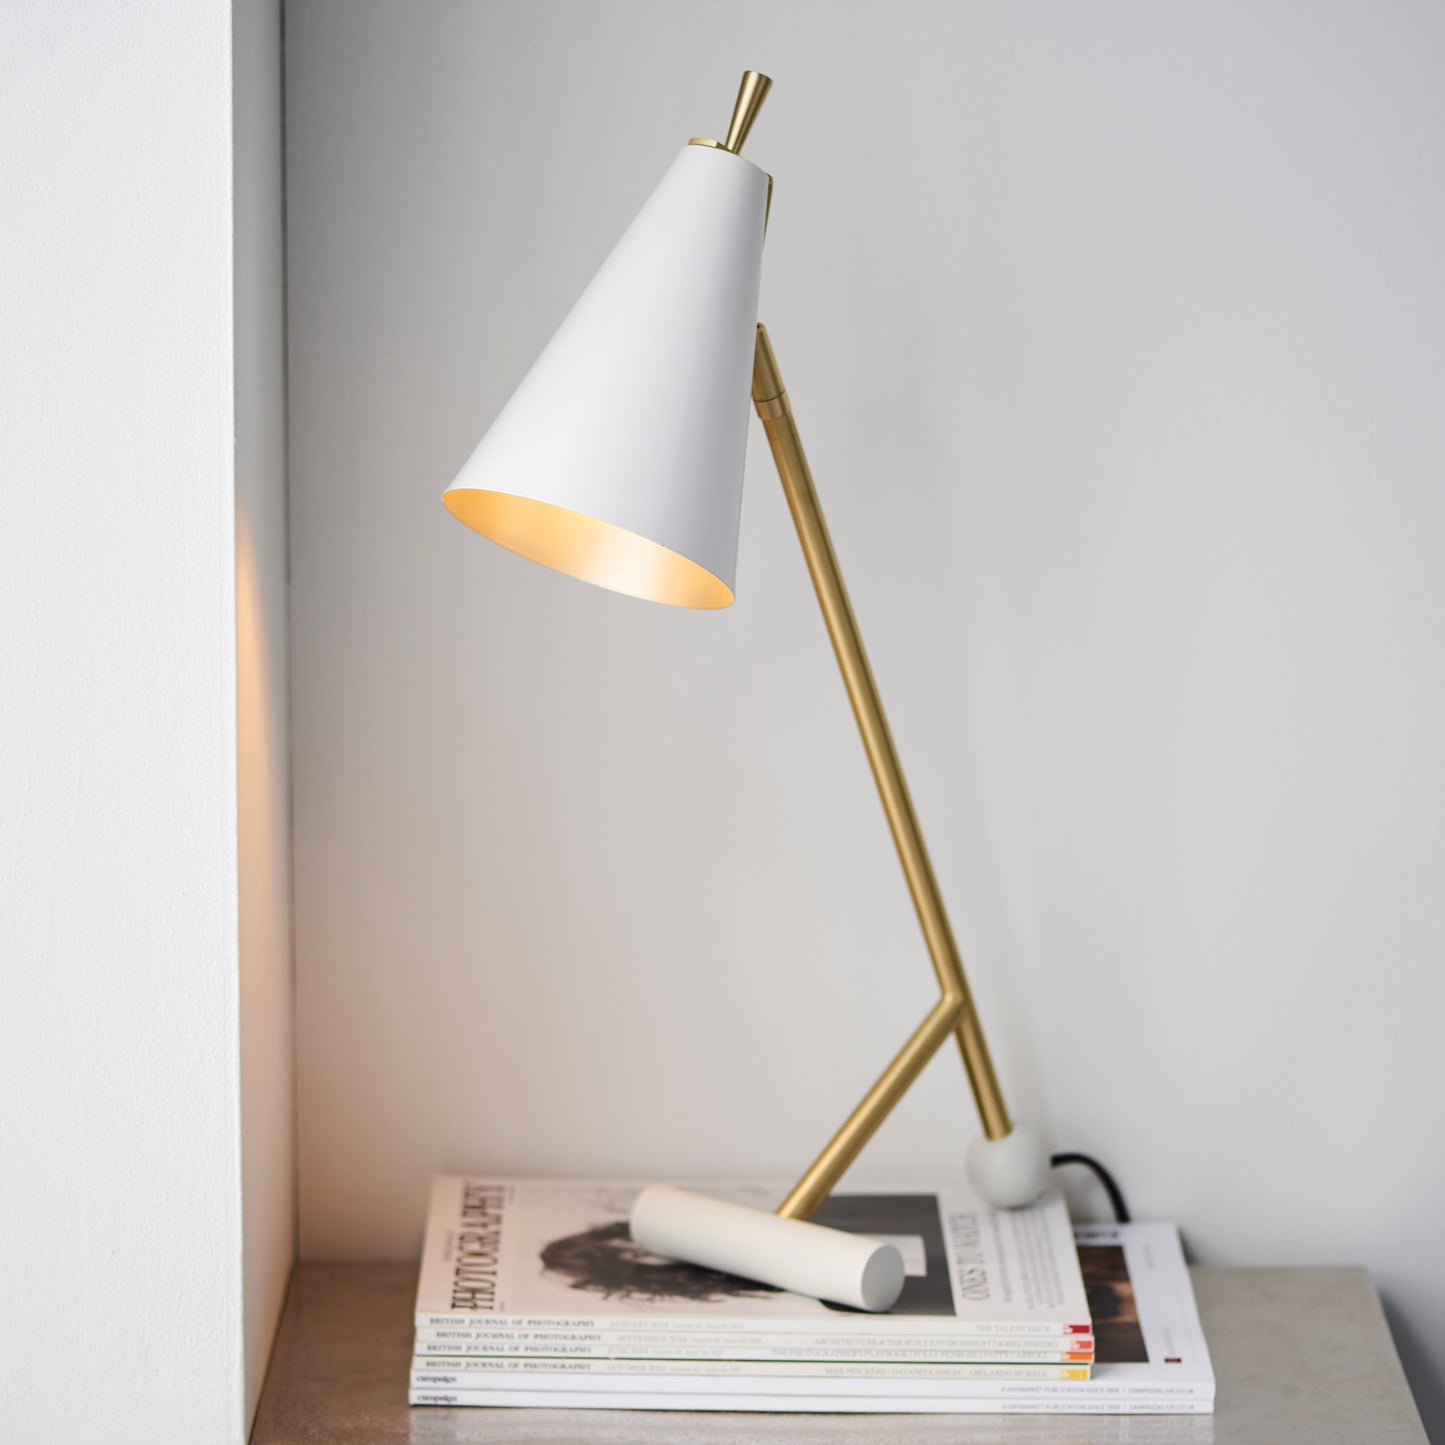 A Lyndhurst Table Lamp Satin Brass/White by Kikiathome.co.uk adding sophistication to your interior decor.